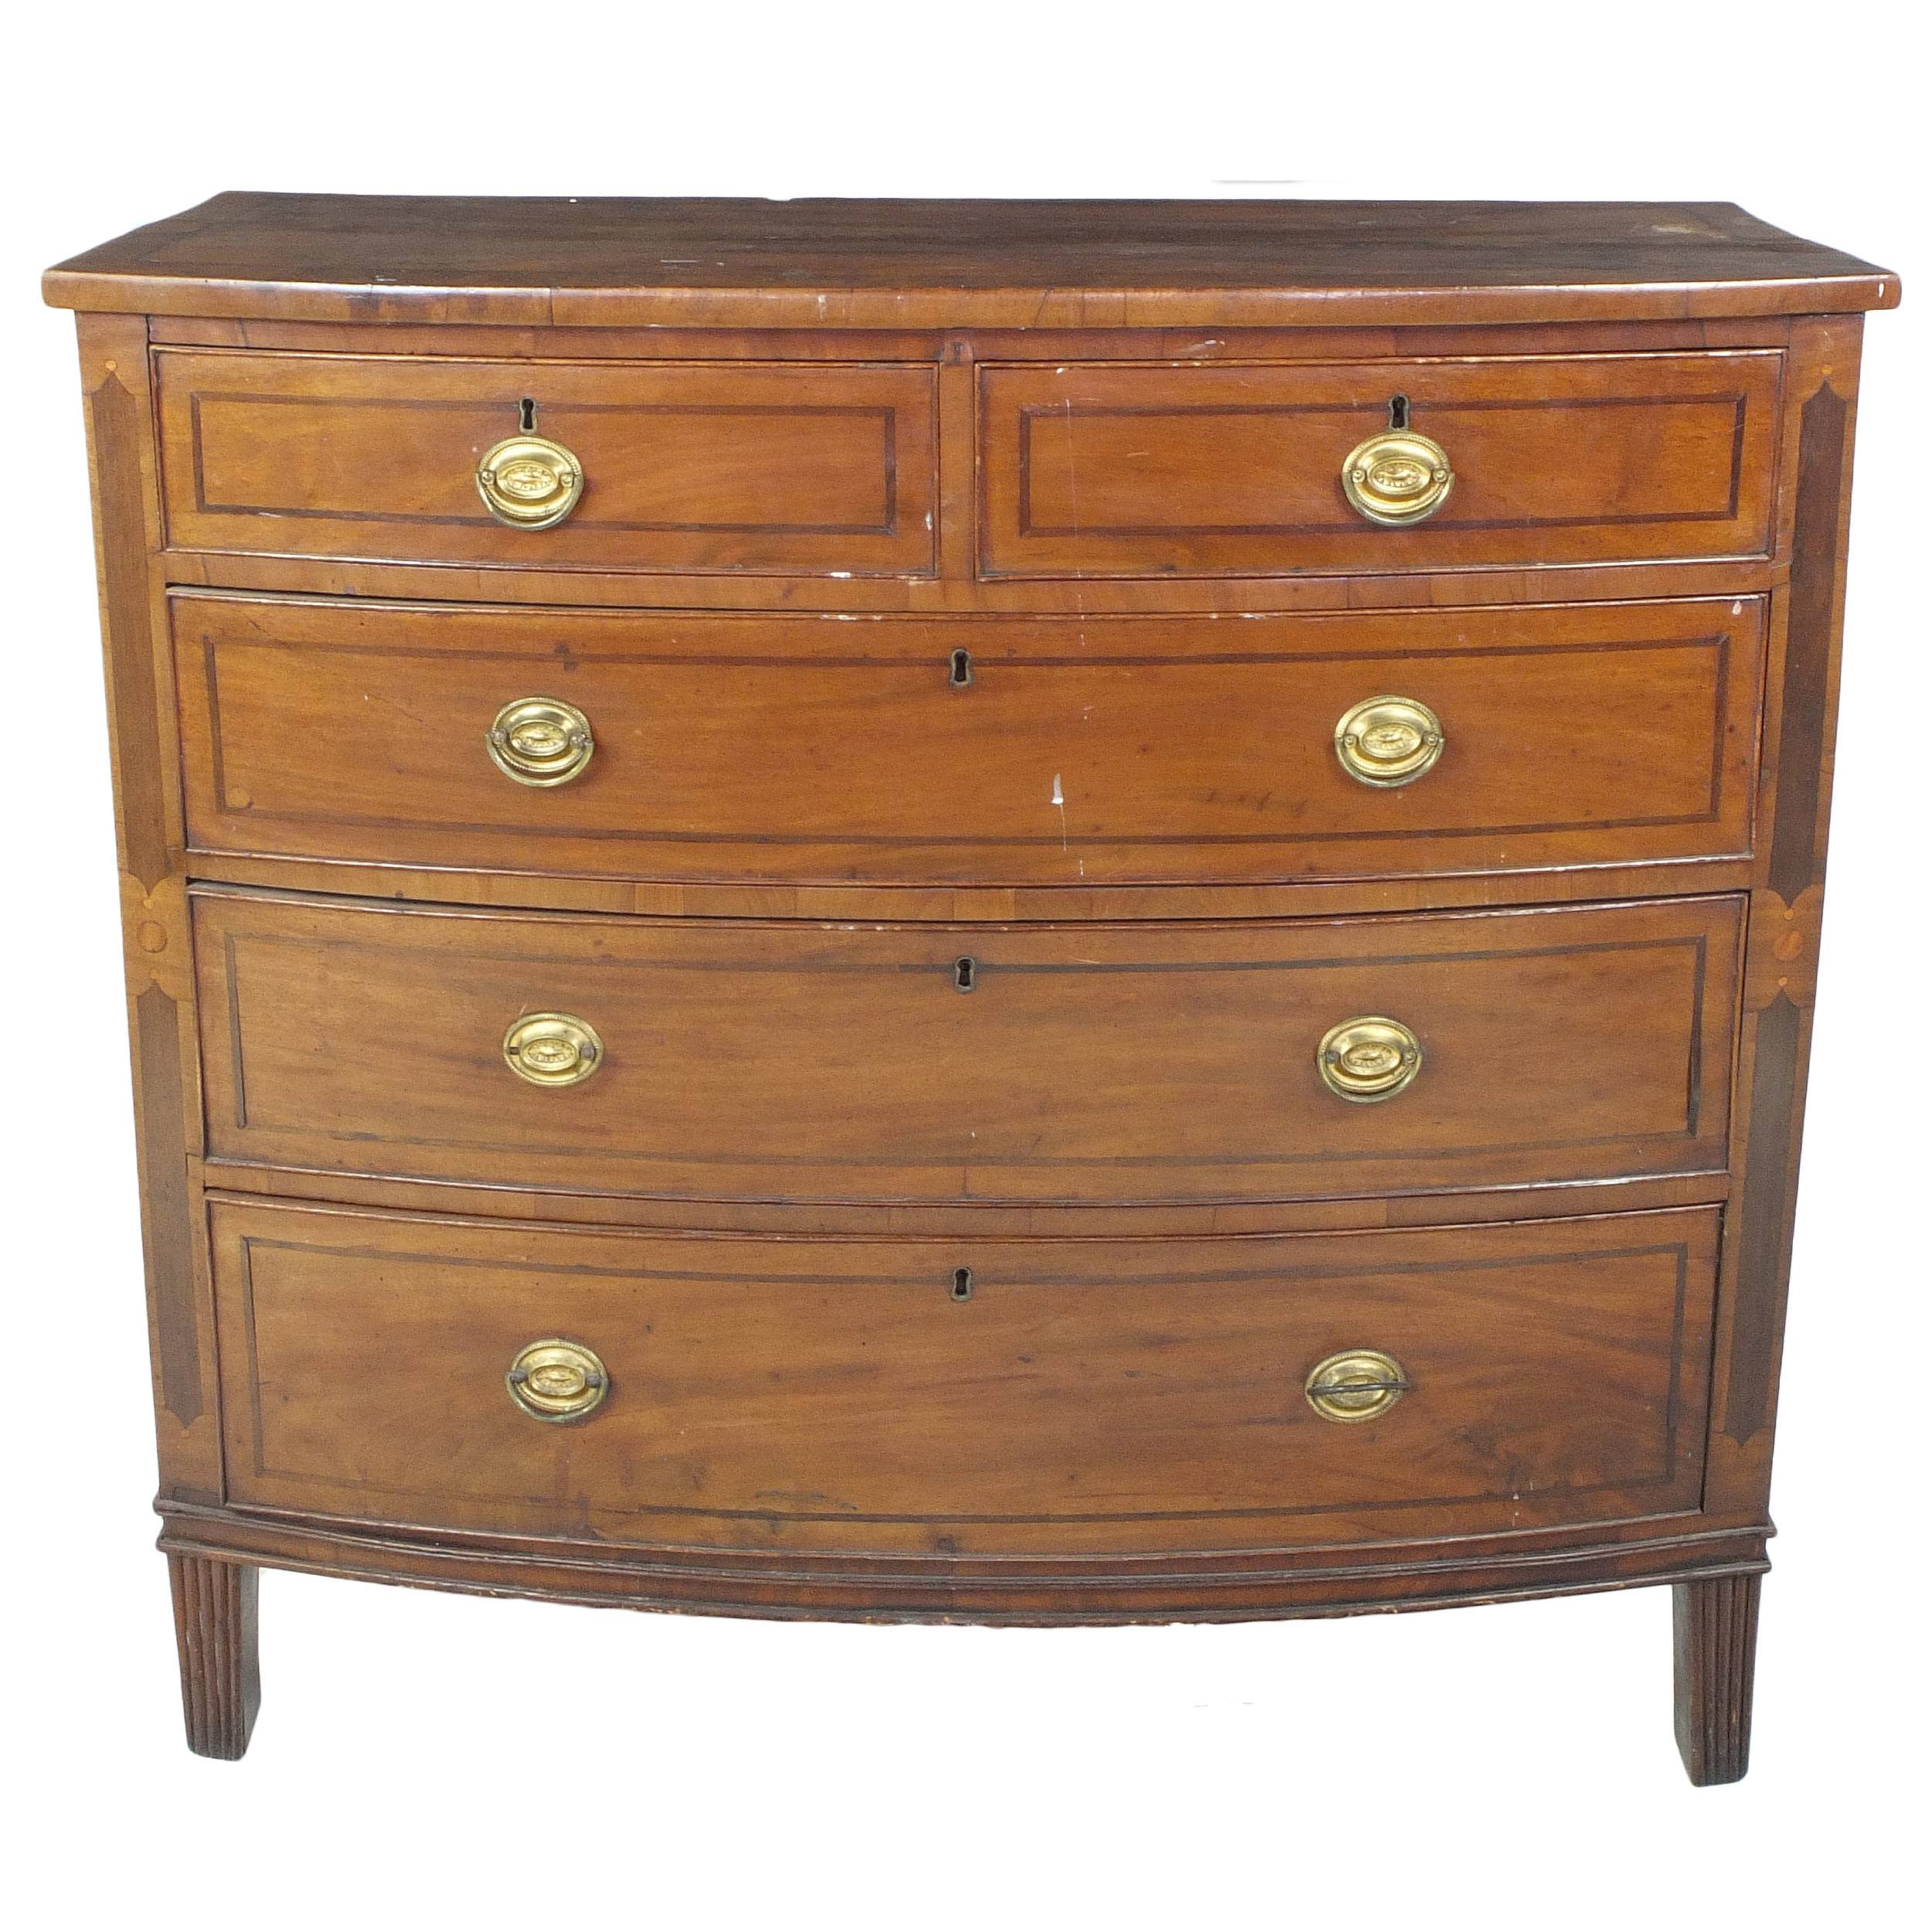 'Regency Inlaid Mahogany Bowfront Chest of Drawers Circa 1810'